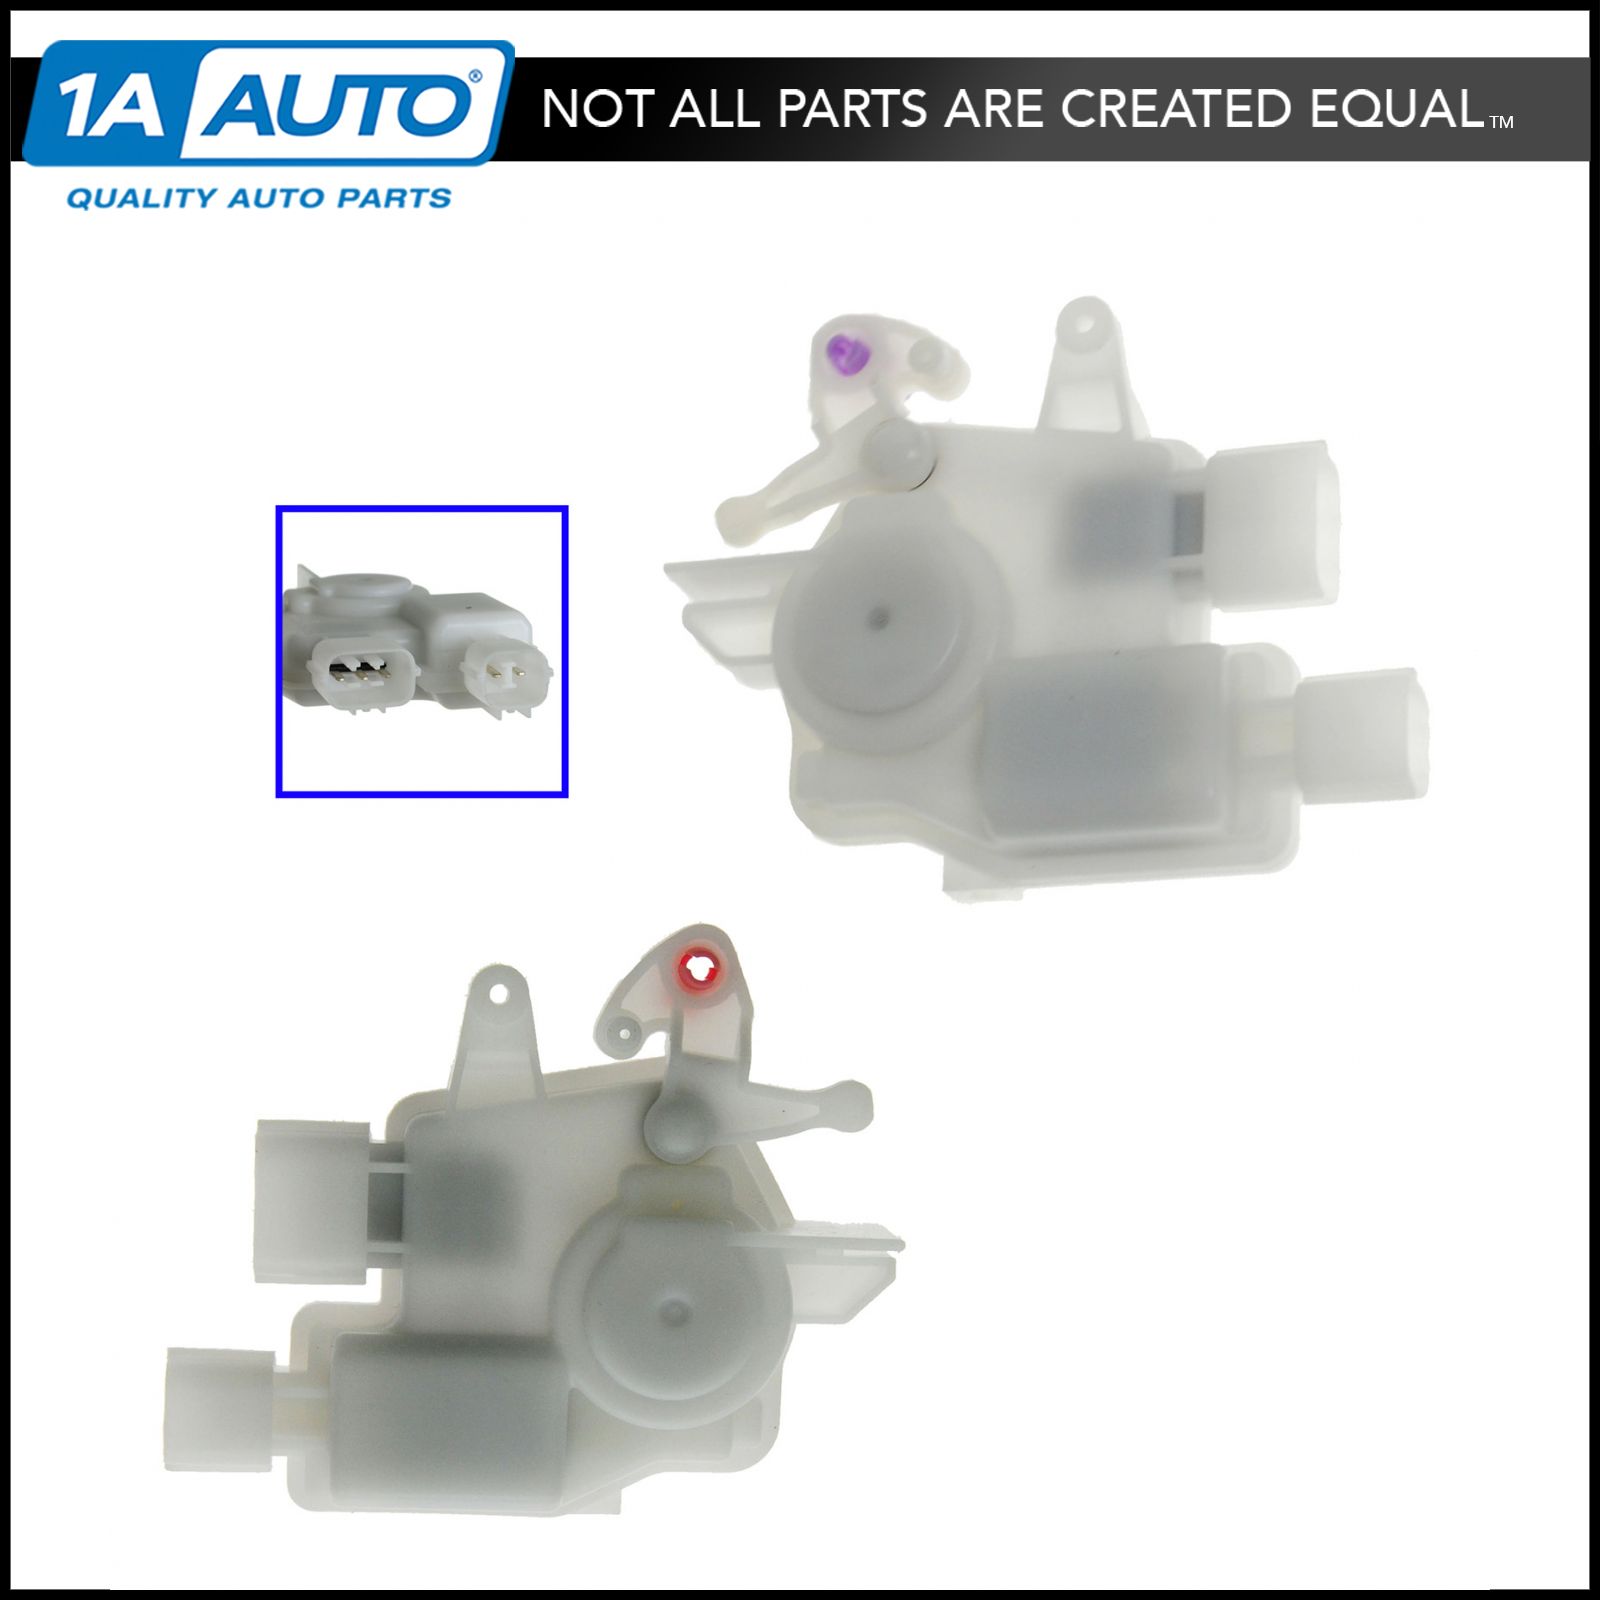 Acura TSX Left/Right Side Door Lock Actuator Fit For Acura TL Honda Accord